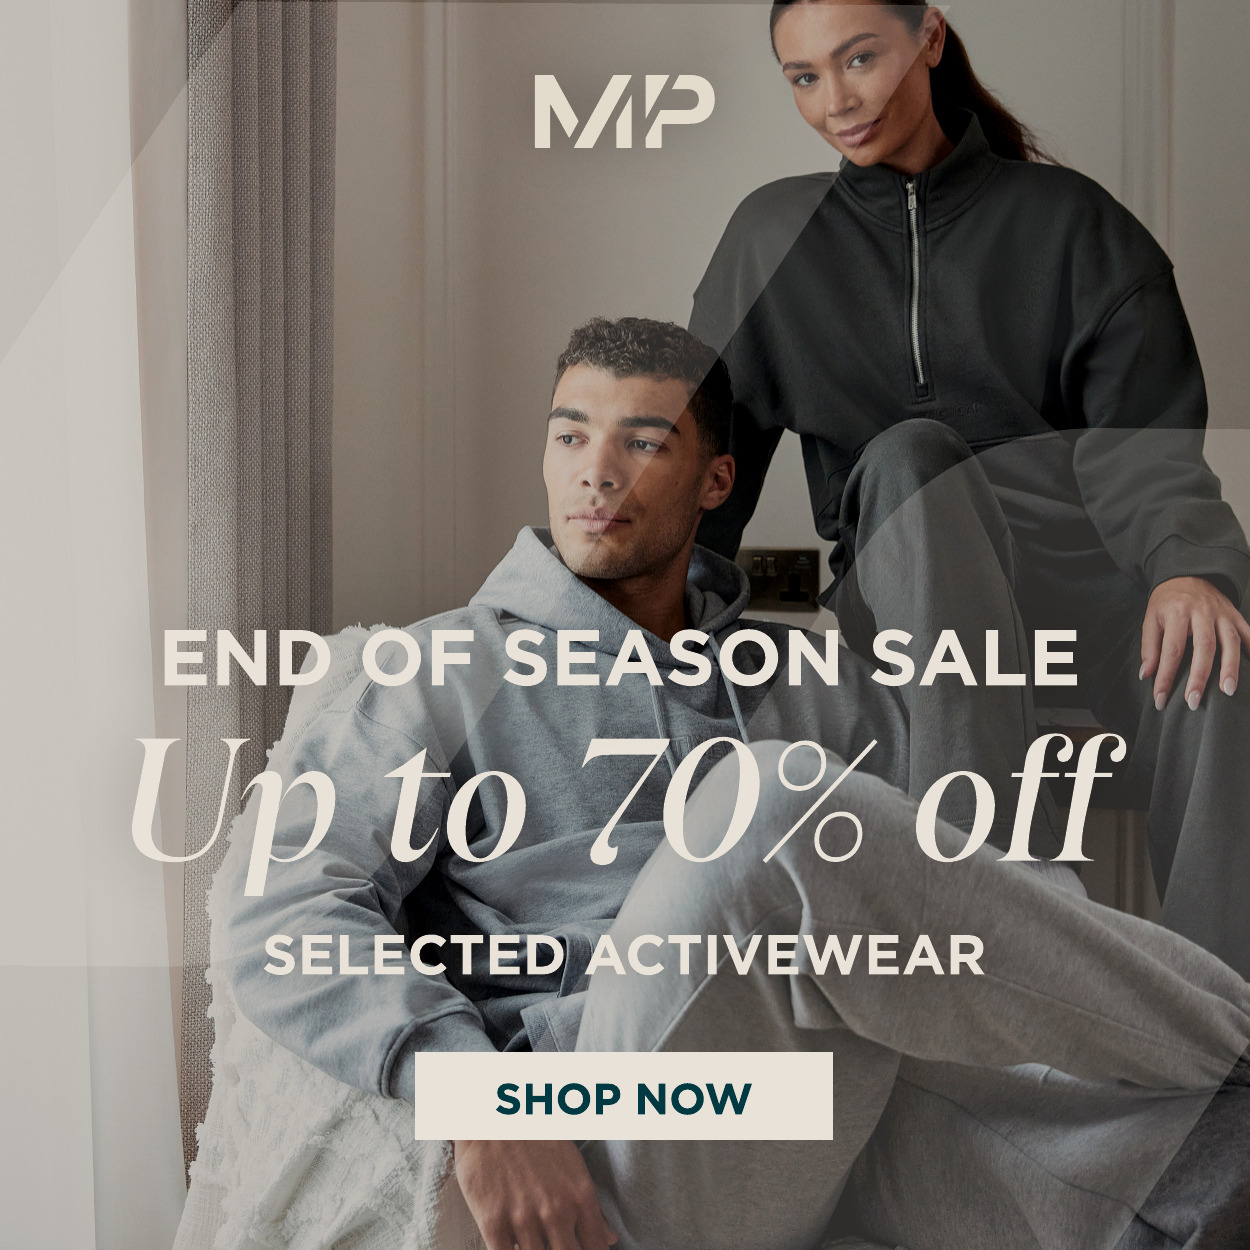 End of season sale up to 70% off selected activewear. shop now